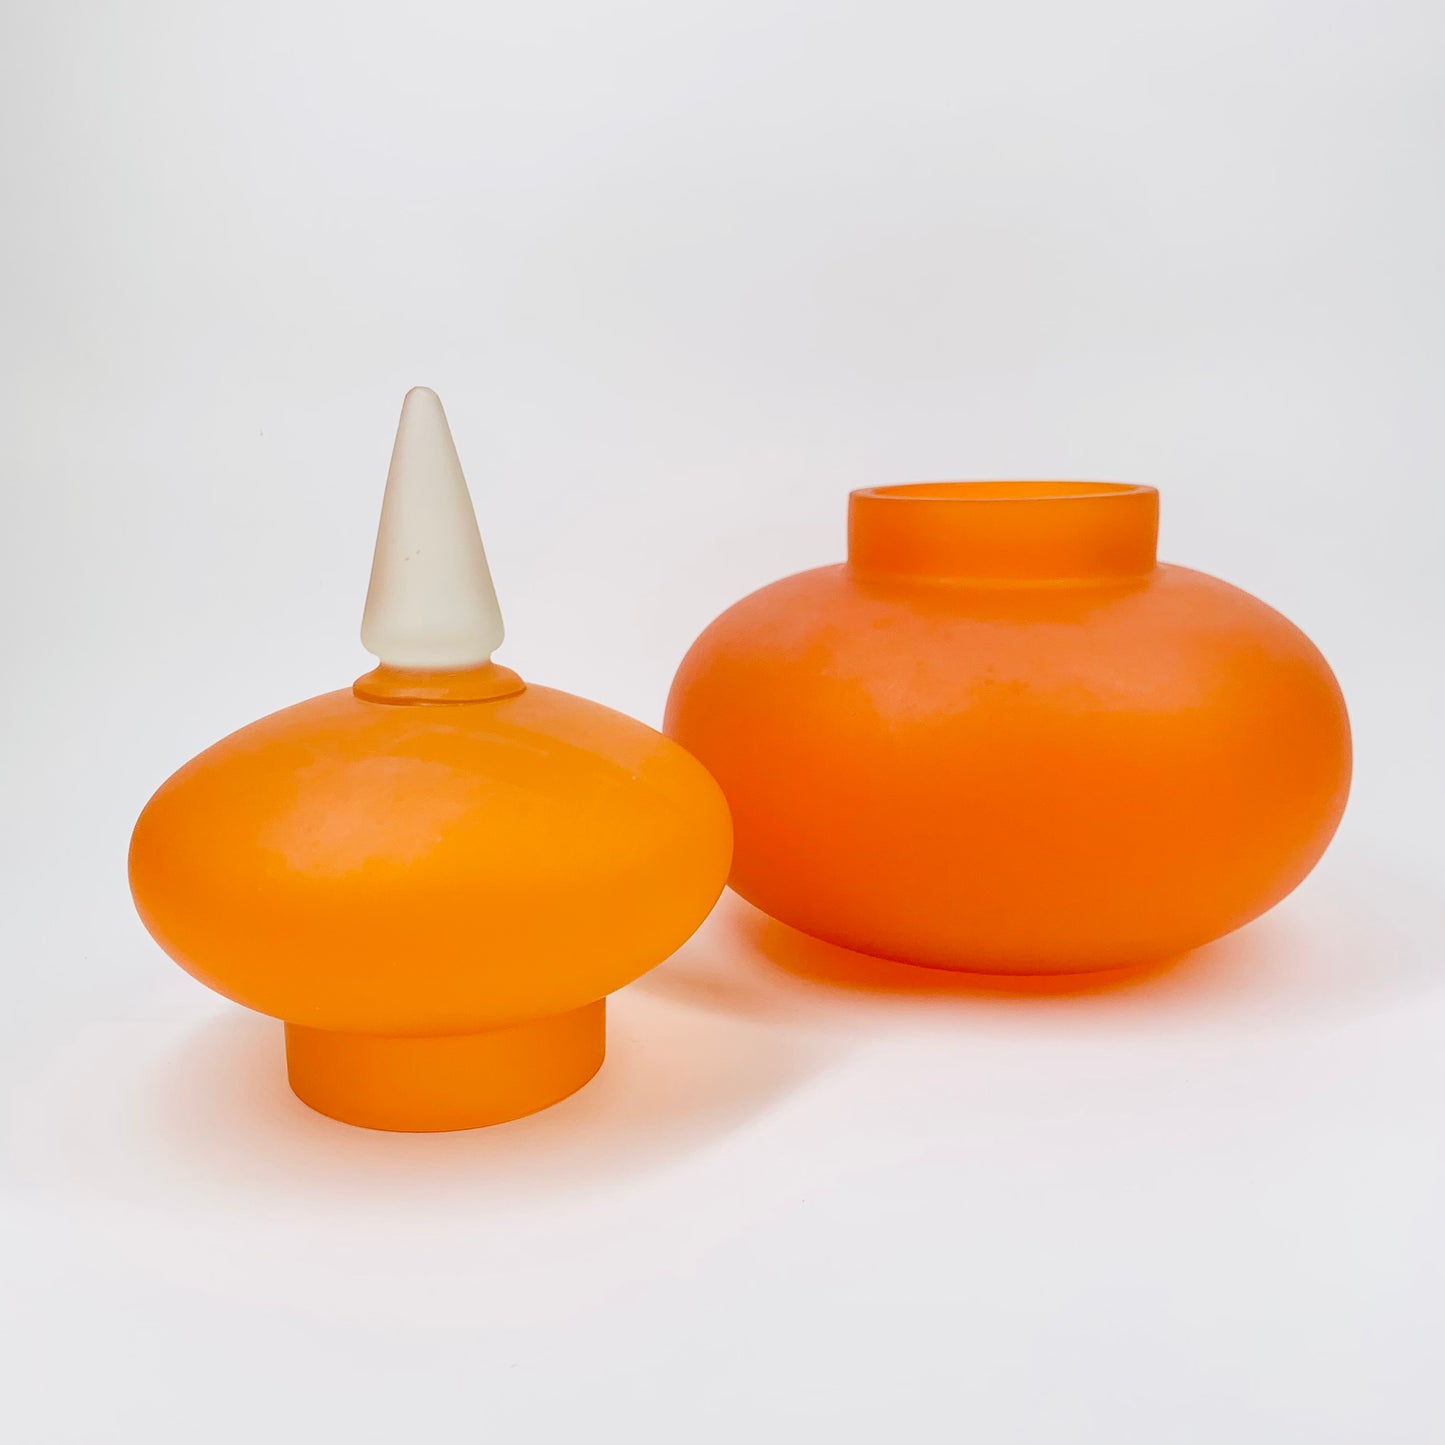 Extremely rare Midcentury Italian orange satin glass canister with minaret lid